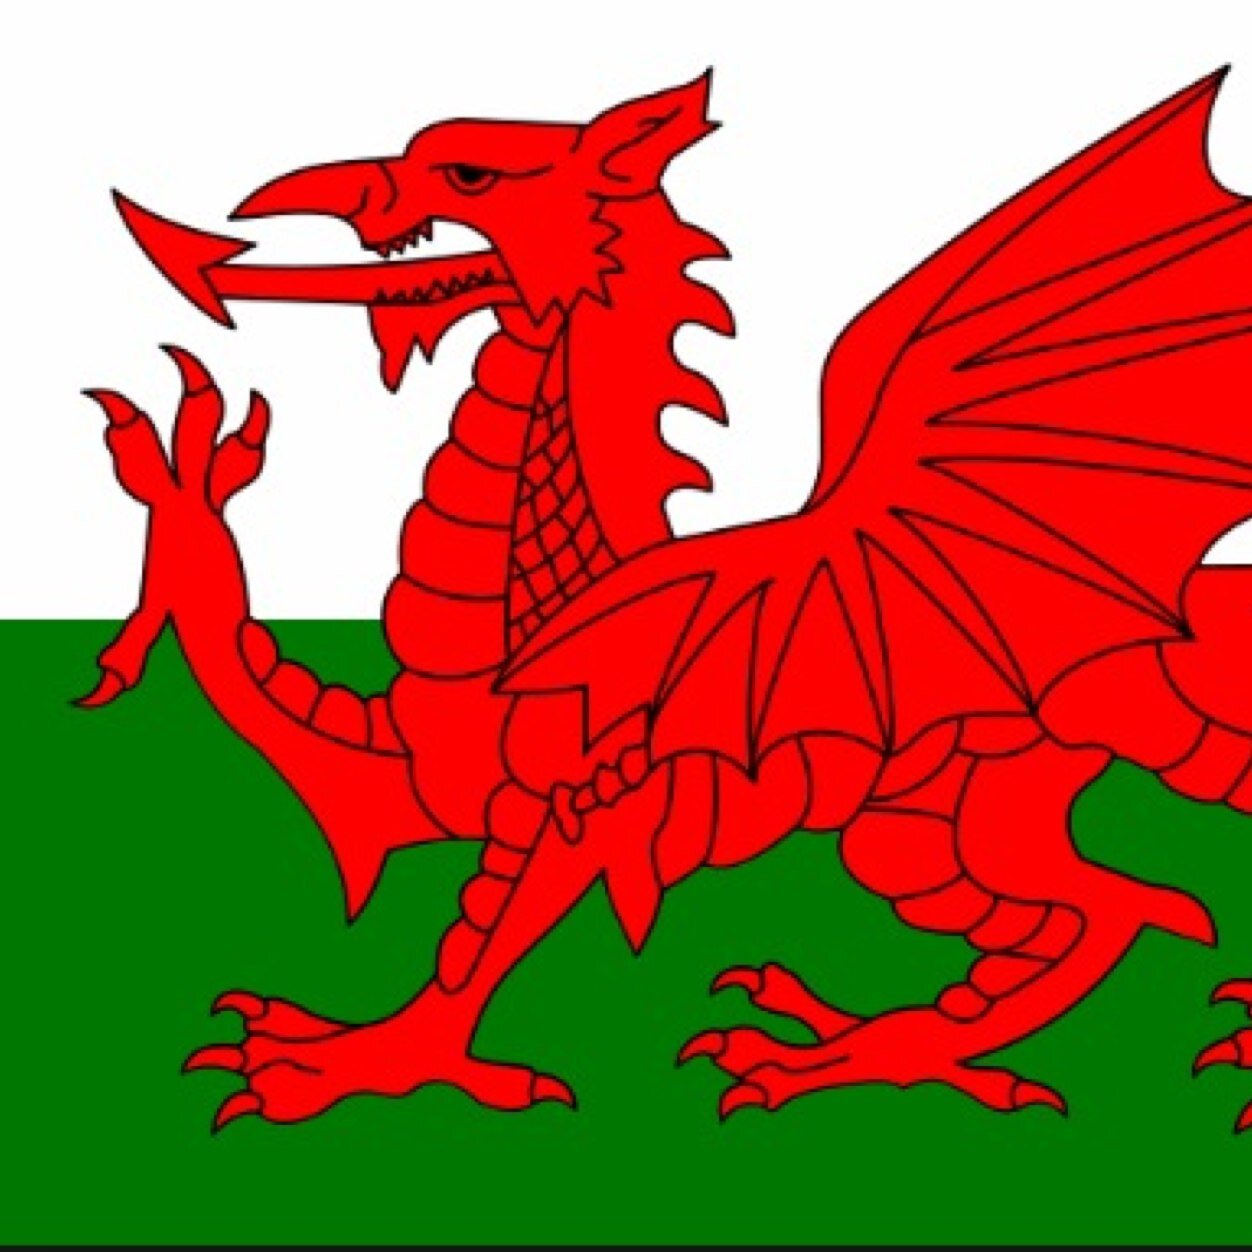 the ORIGINAL welsh problems account on twitter, est. march 2014